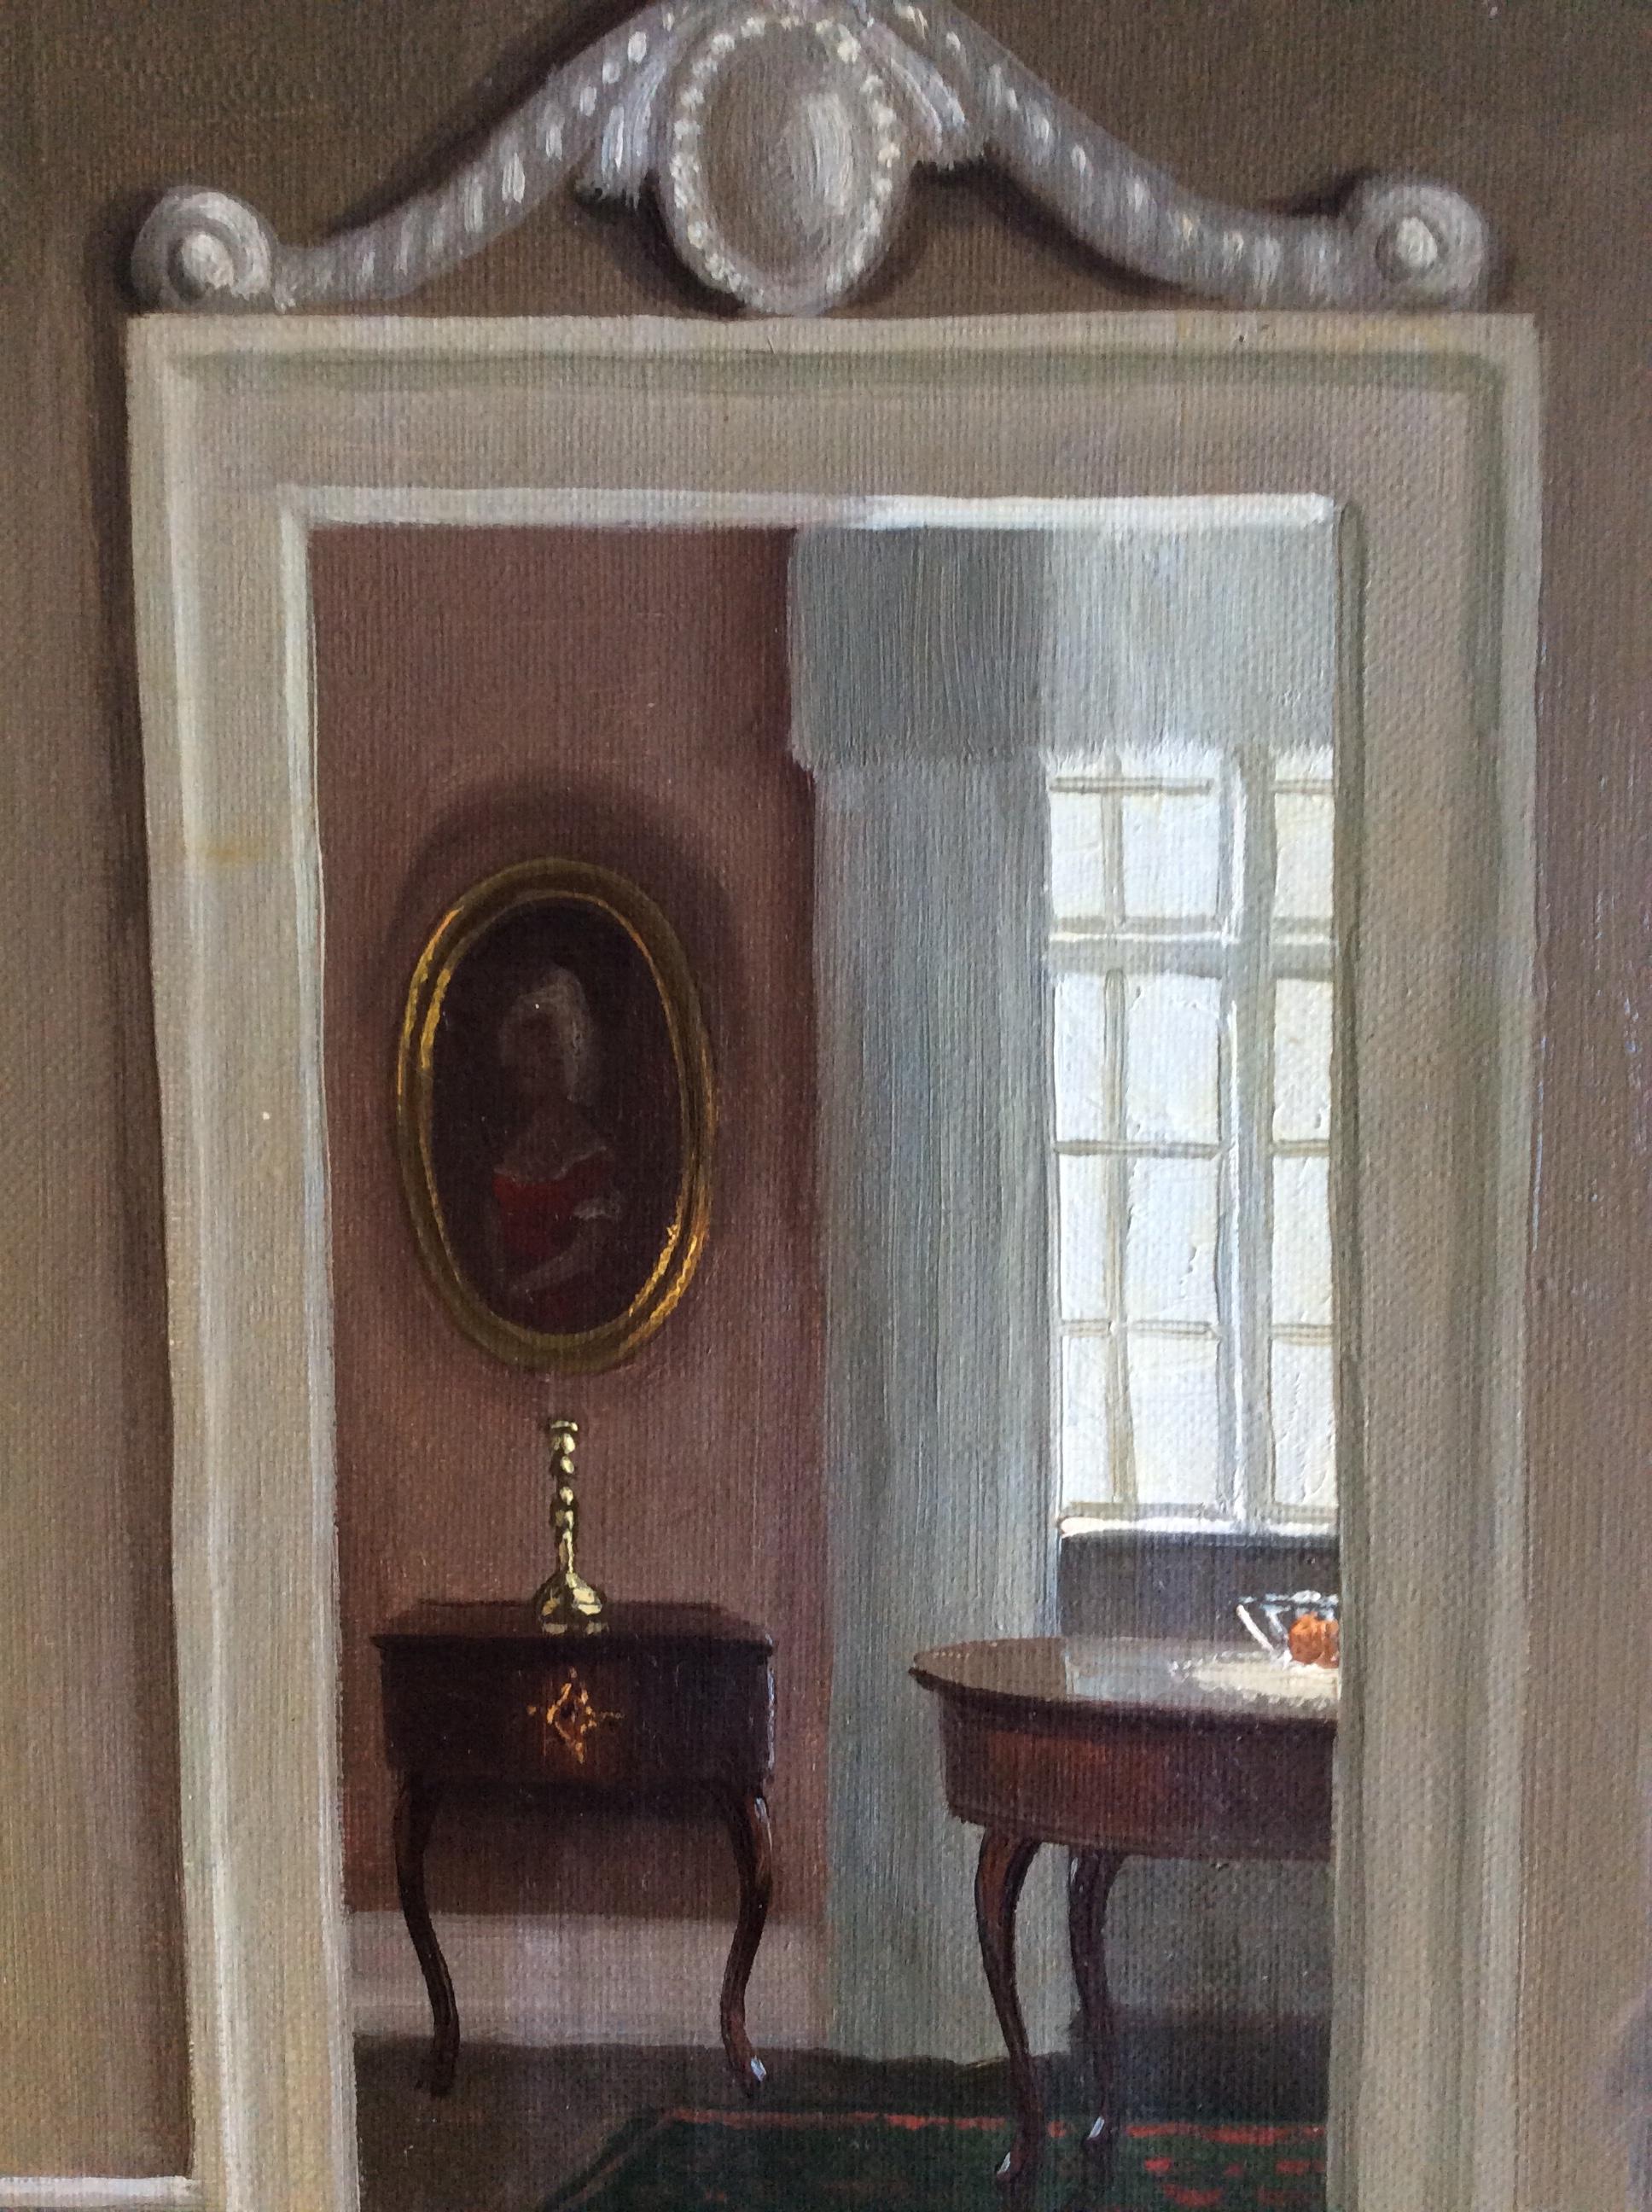 An painting interior from living room sig. C.Birkso size incl. frame W 45, H 55 cm, without frame W 38, H 48 cm.